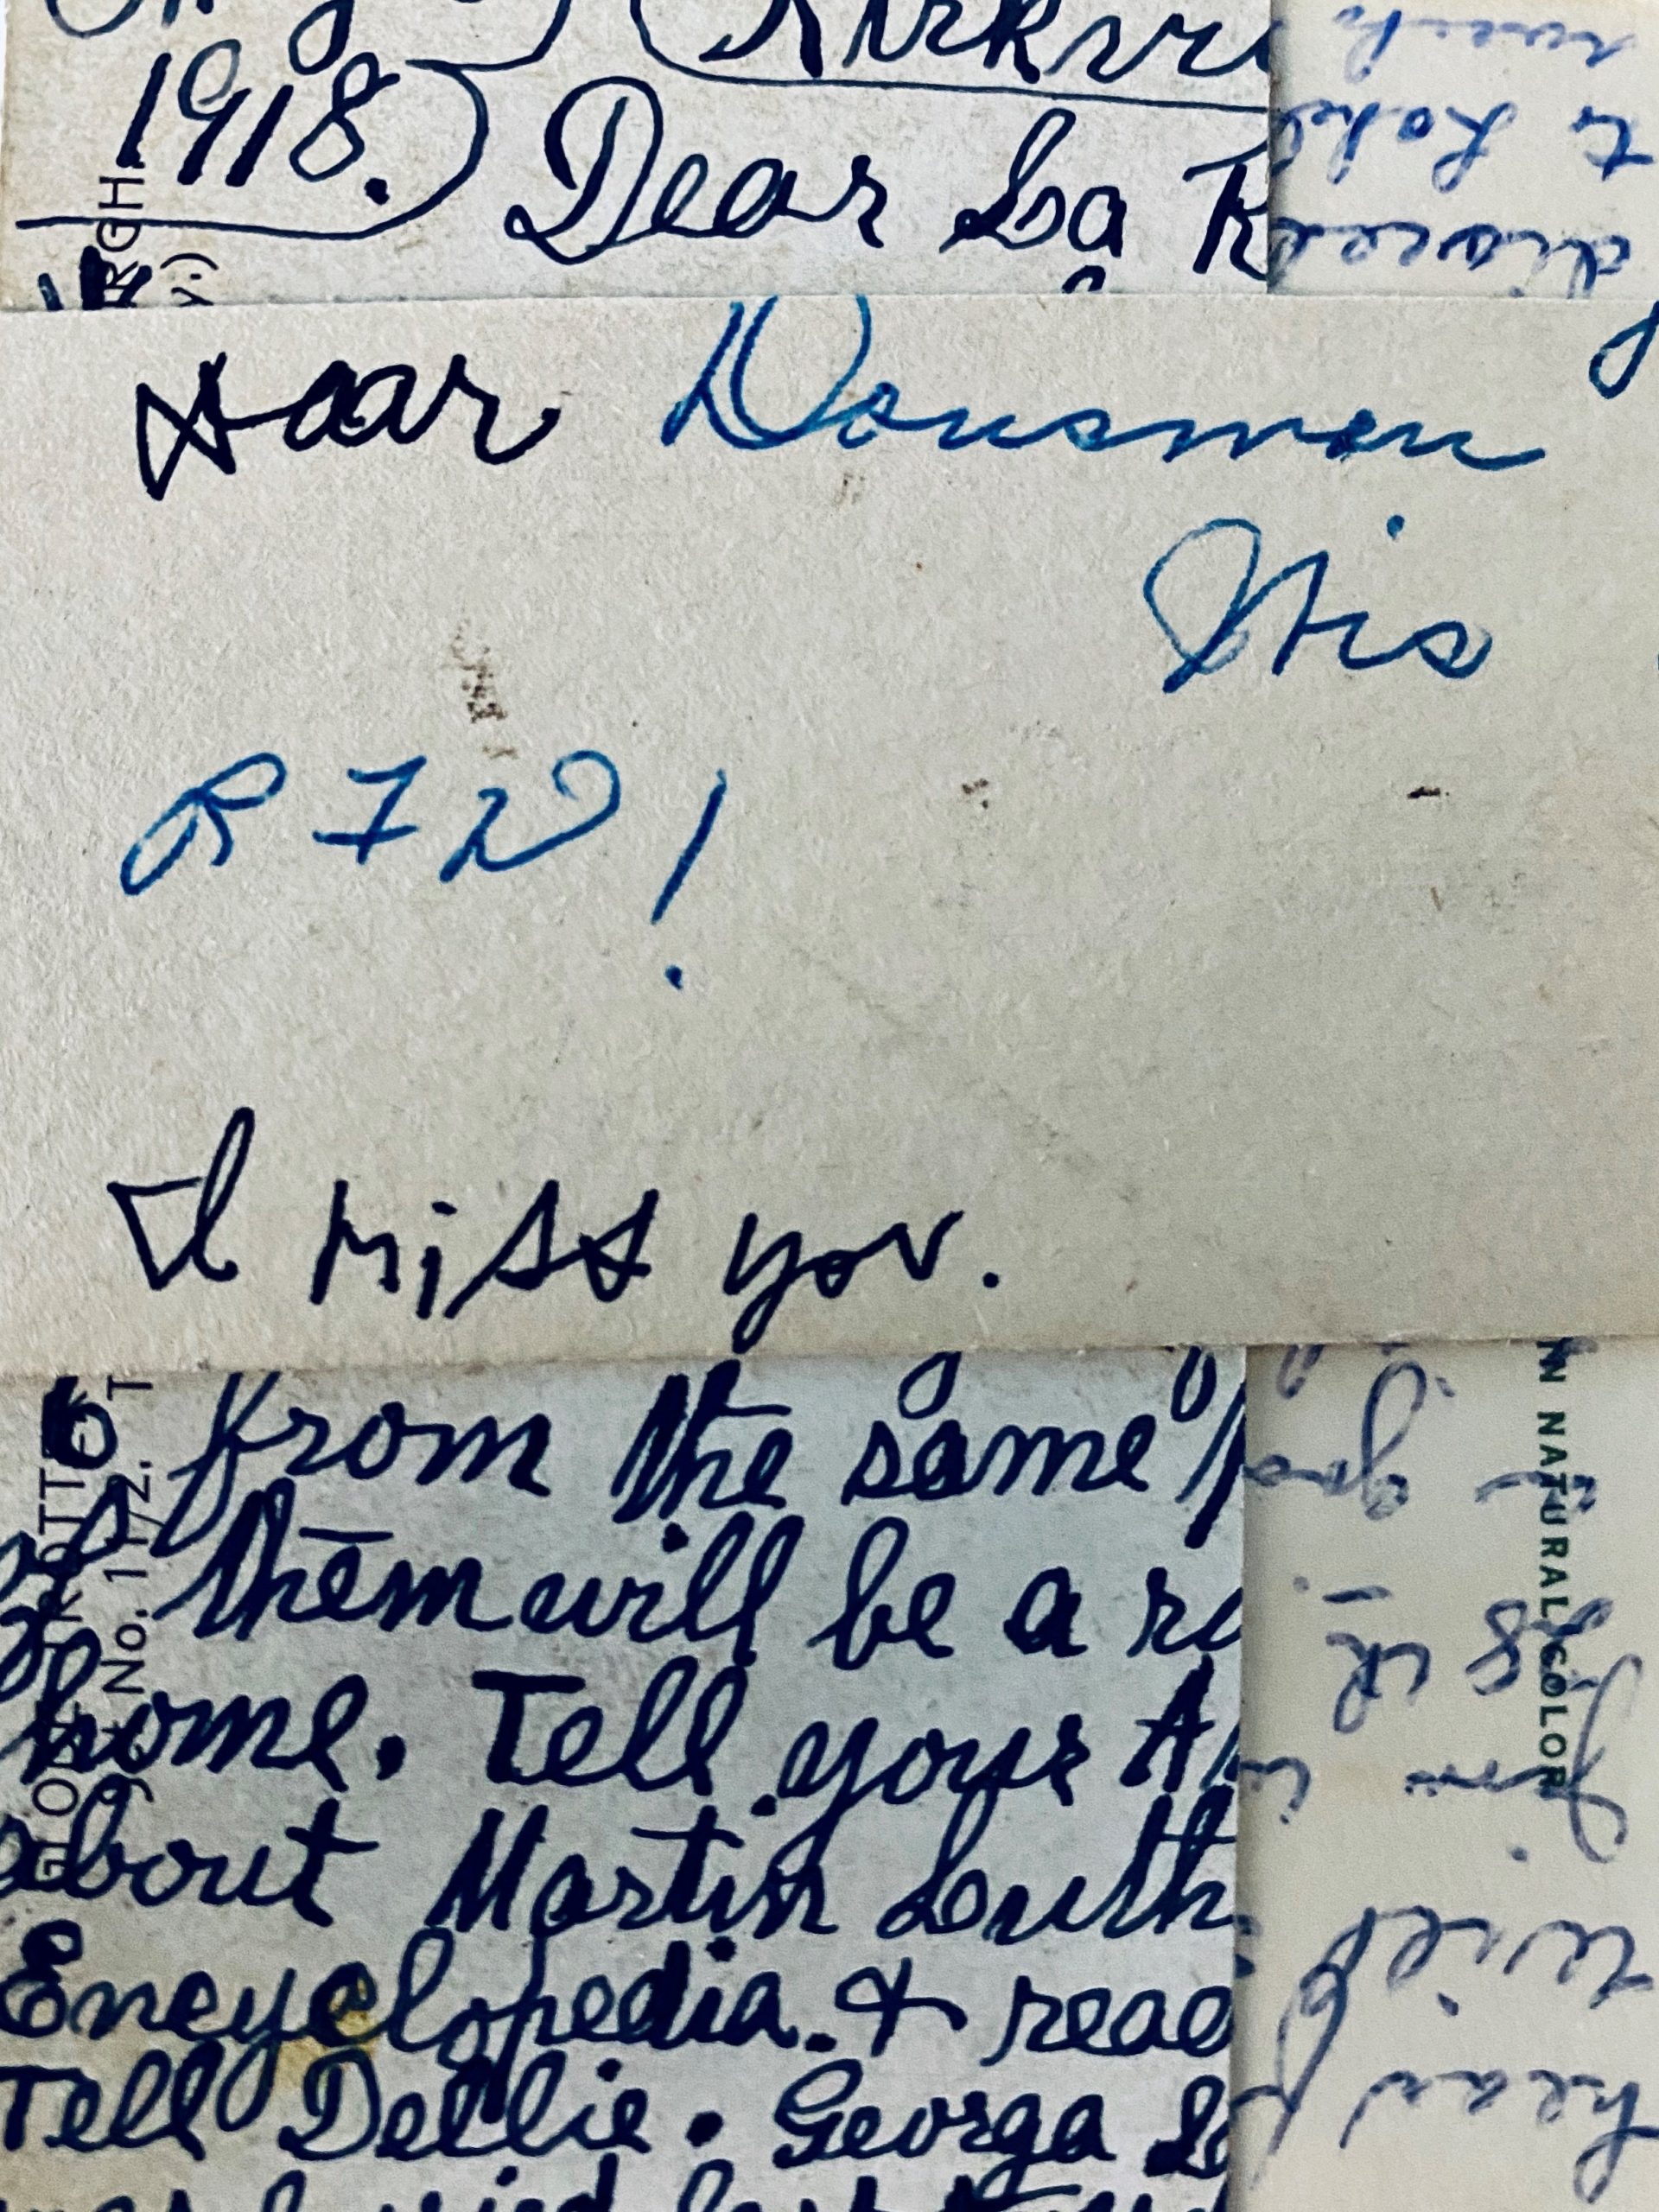 Alt Text: A collage of different cursive handwritings written in ink overlap one another. Most of the sentences are cut off, but the phrases “I miss you,” “RIP!”, and “1918” can be read.